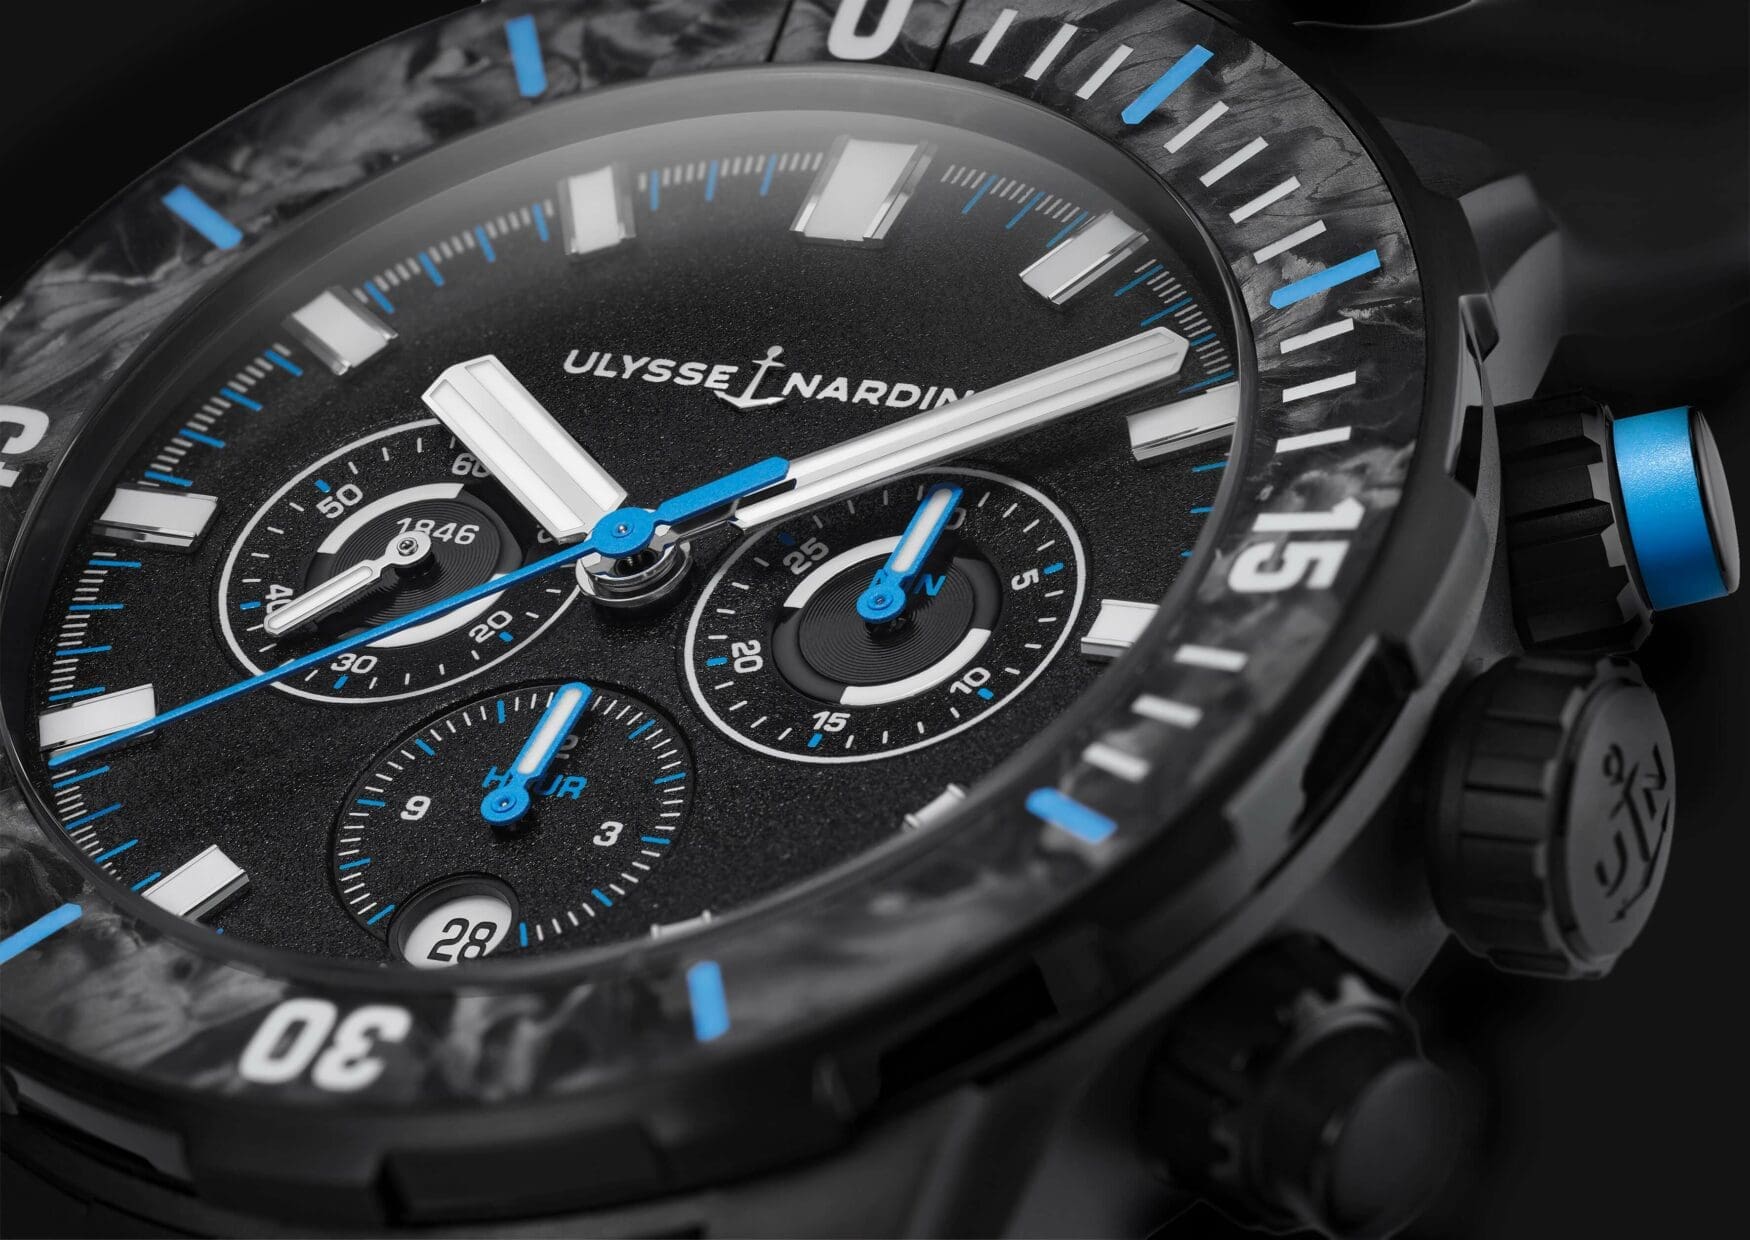 New Ulysse Nardin Ocean Race Diver Chronograph Limited Edition honours the 50th anniversary of the legendary sustainability-focused race